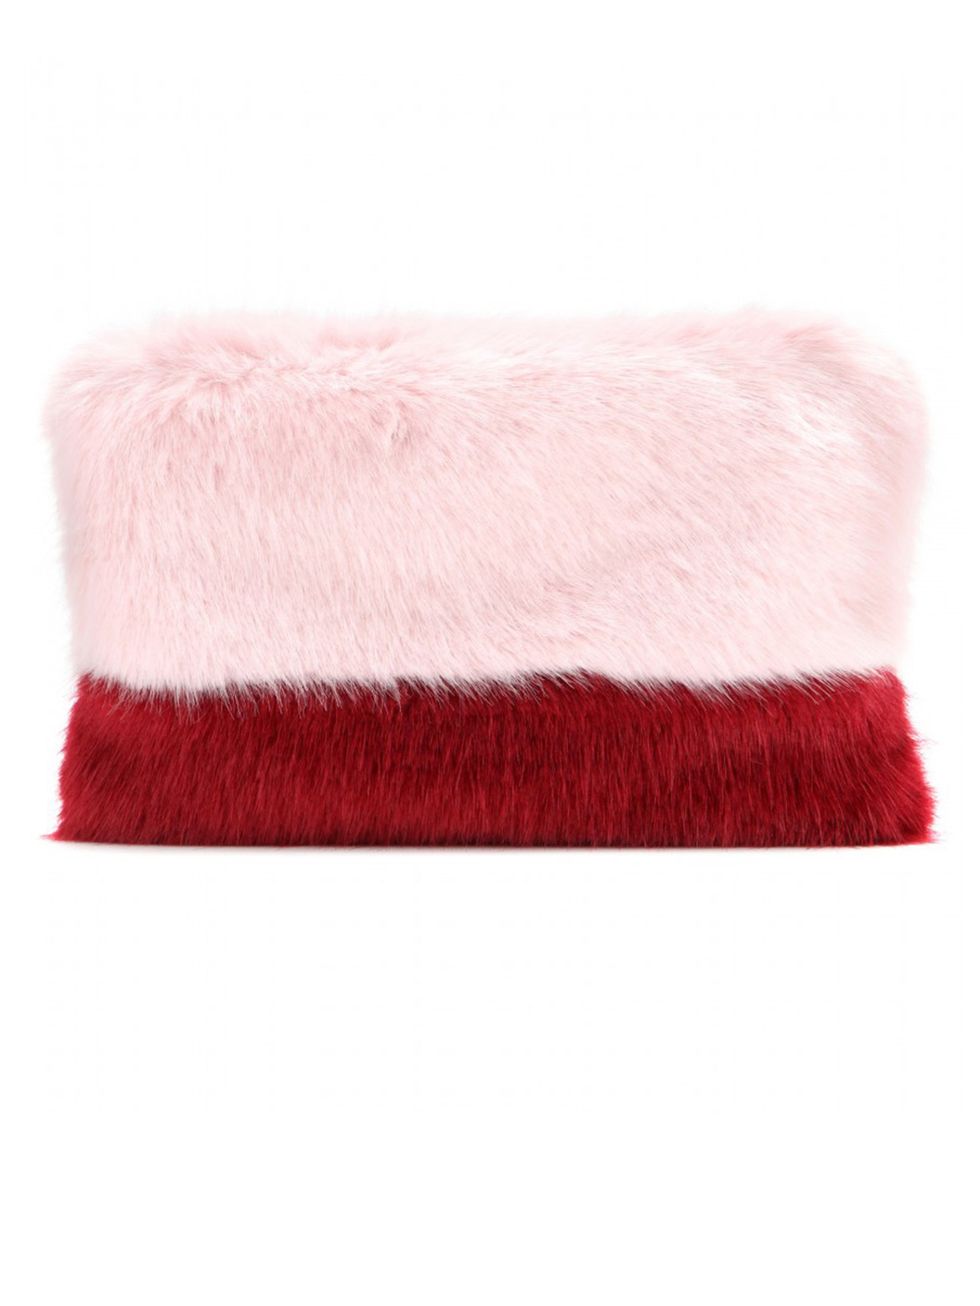 Textile, Red, Costume accessory, Carmine, Fur clothing, Maroon, Natural material, Fur, Wool, Coquelicot, 